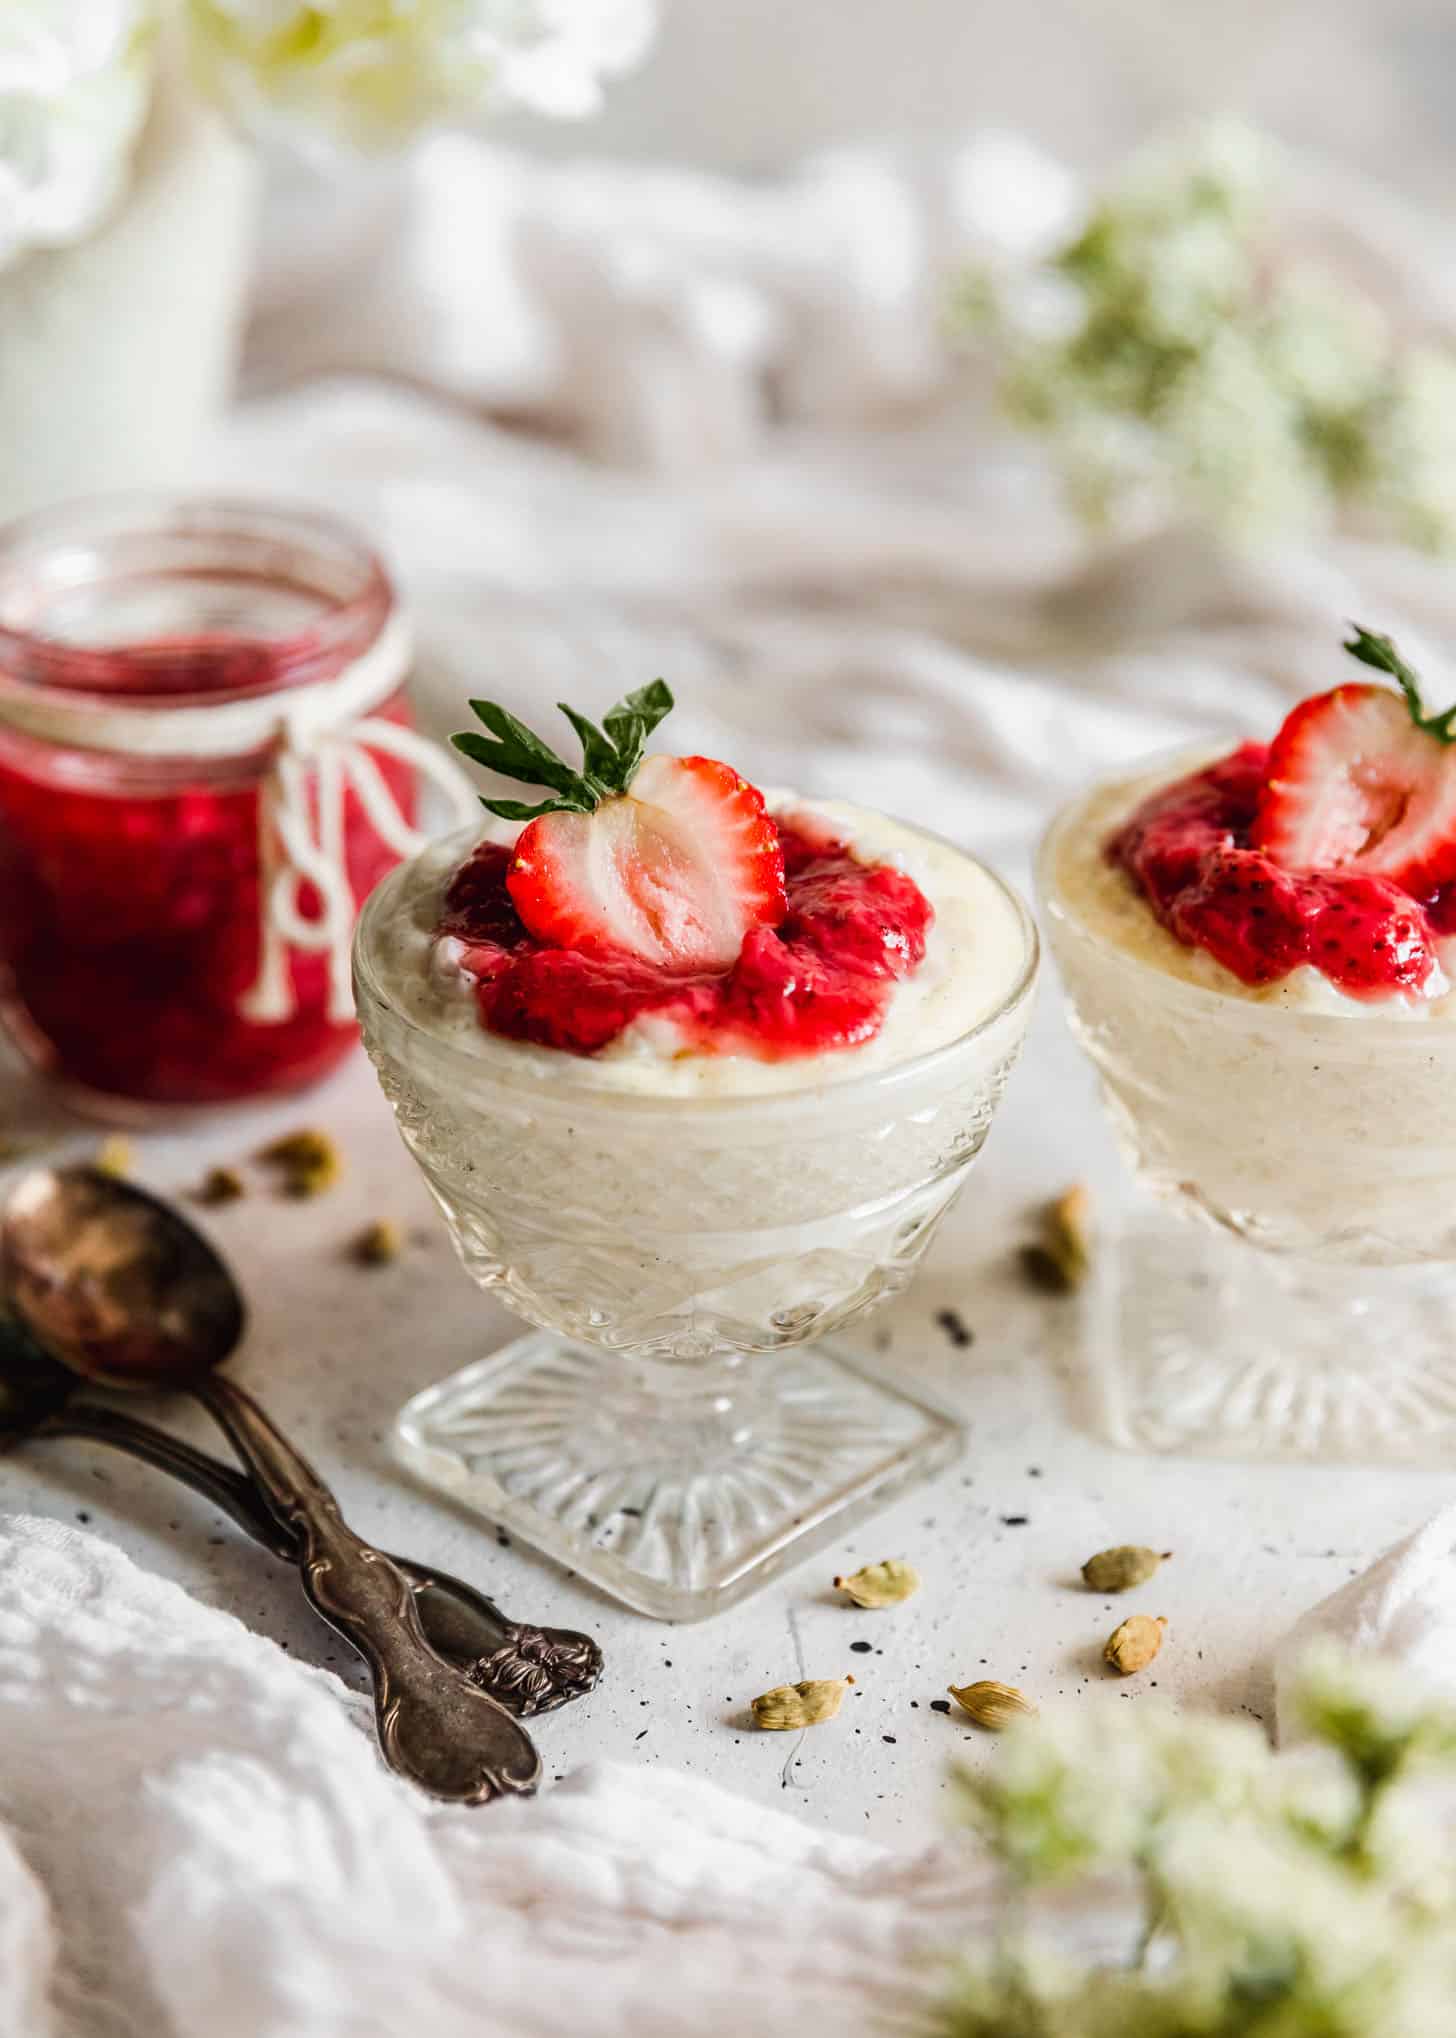 Two glass dishes of cardamom rice pudding with strawberries next to jam, spoons, cardamom pods, and white flowers on a white table.